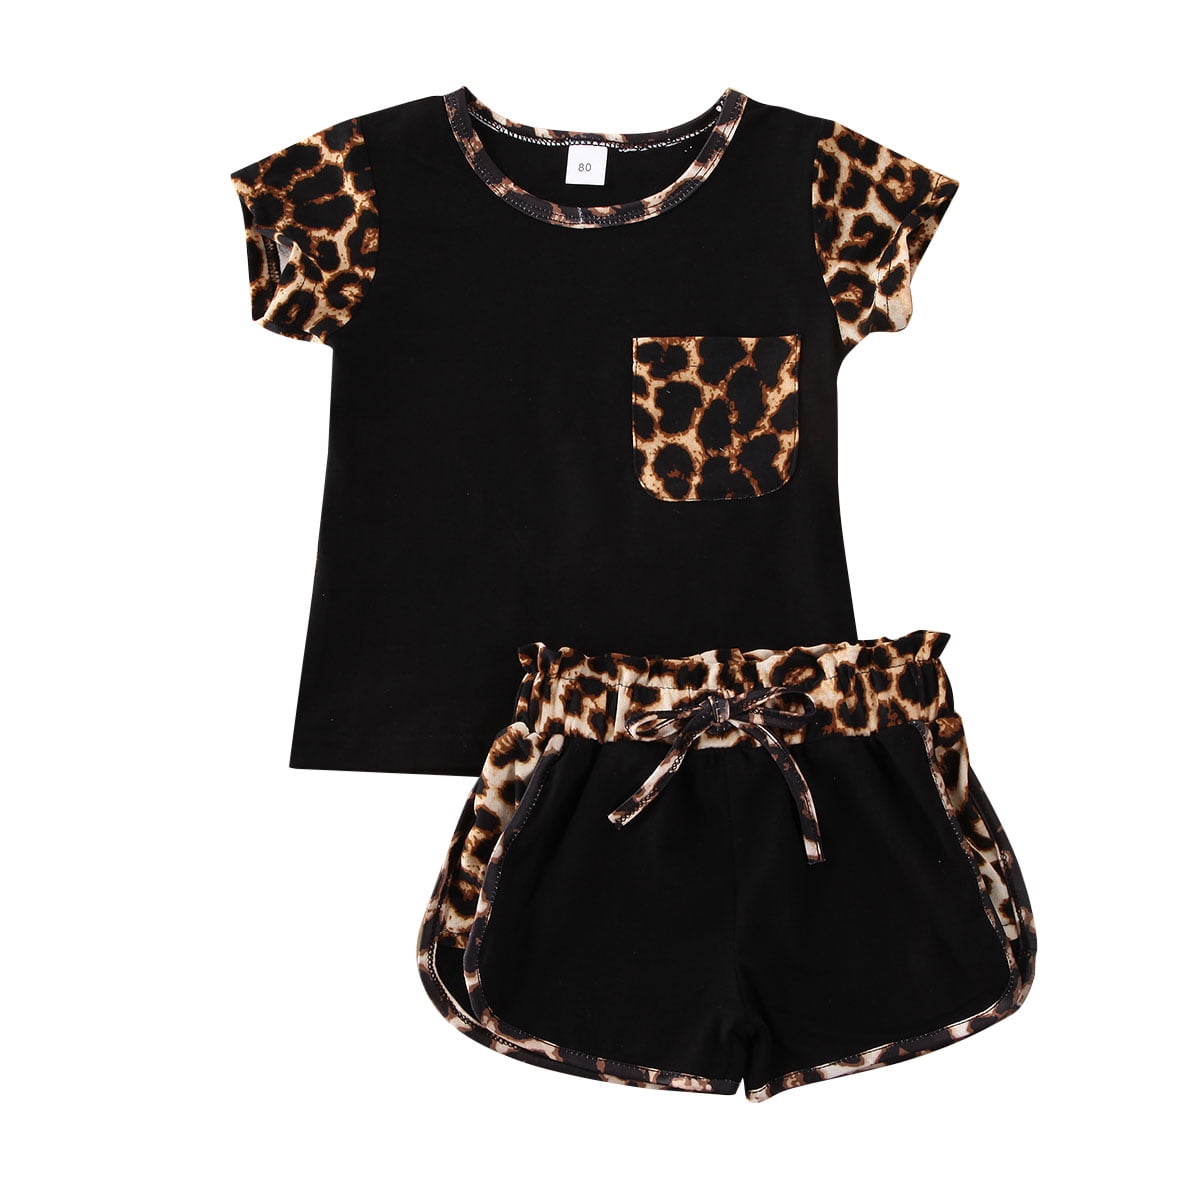 girl leopard outfits